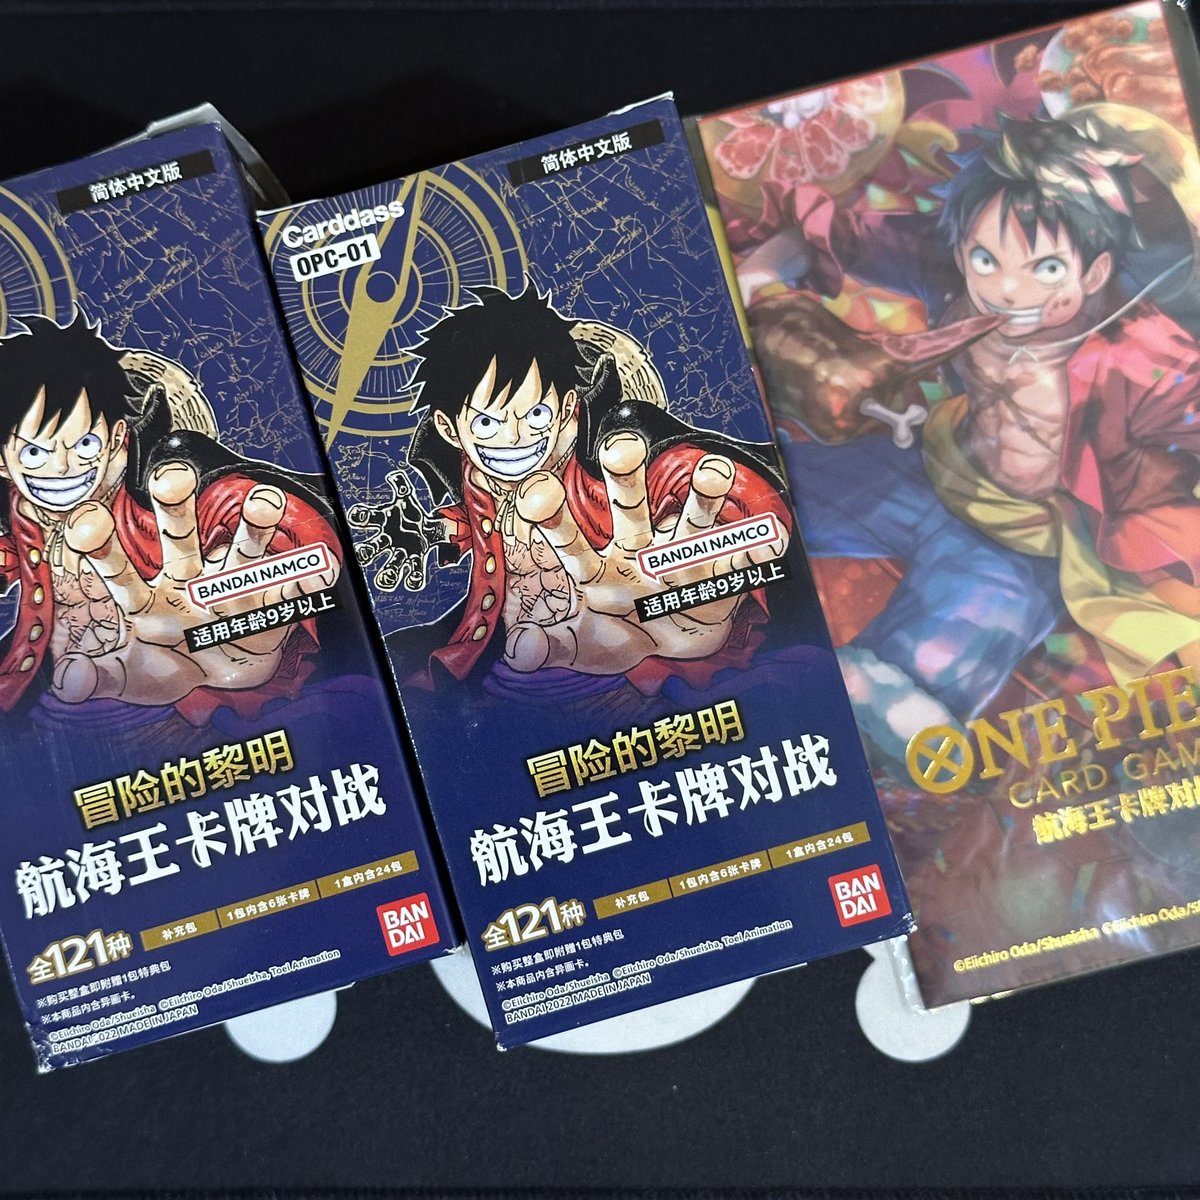 Got my order from @xPokeAri 🔥🔥🔥
They hooked it up with a Chinese Luffy Promo. I can’t wait to rip them and show the pulls! Manga Shanks 🤞🏼 Also, can’t wait for my Chinese 1st anniversary set 😬😬😬

#onepiece #onepiececardgame #op01